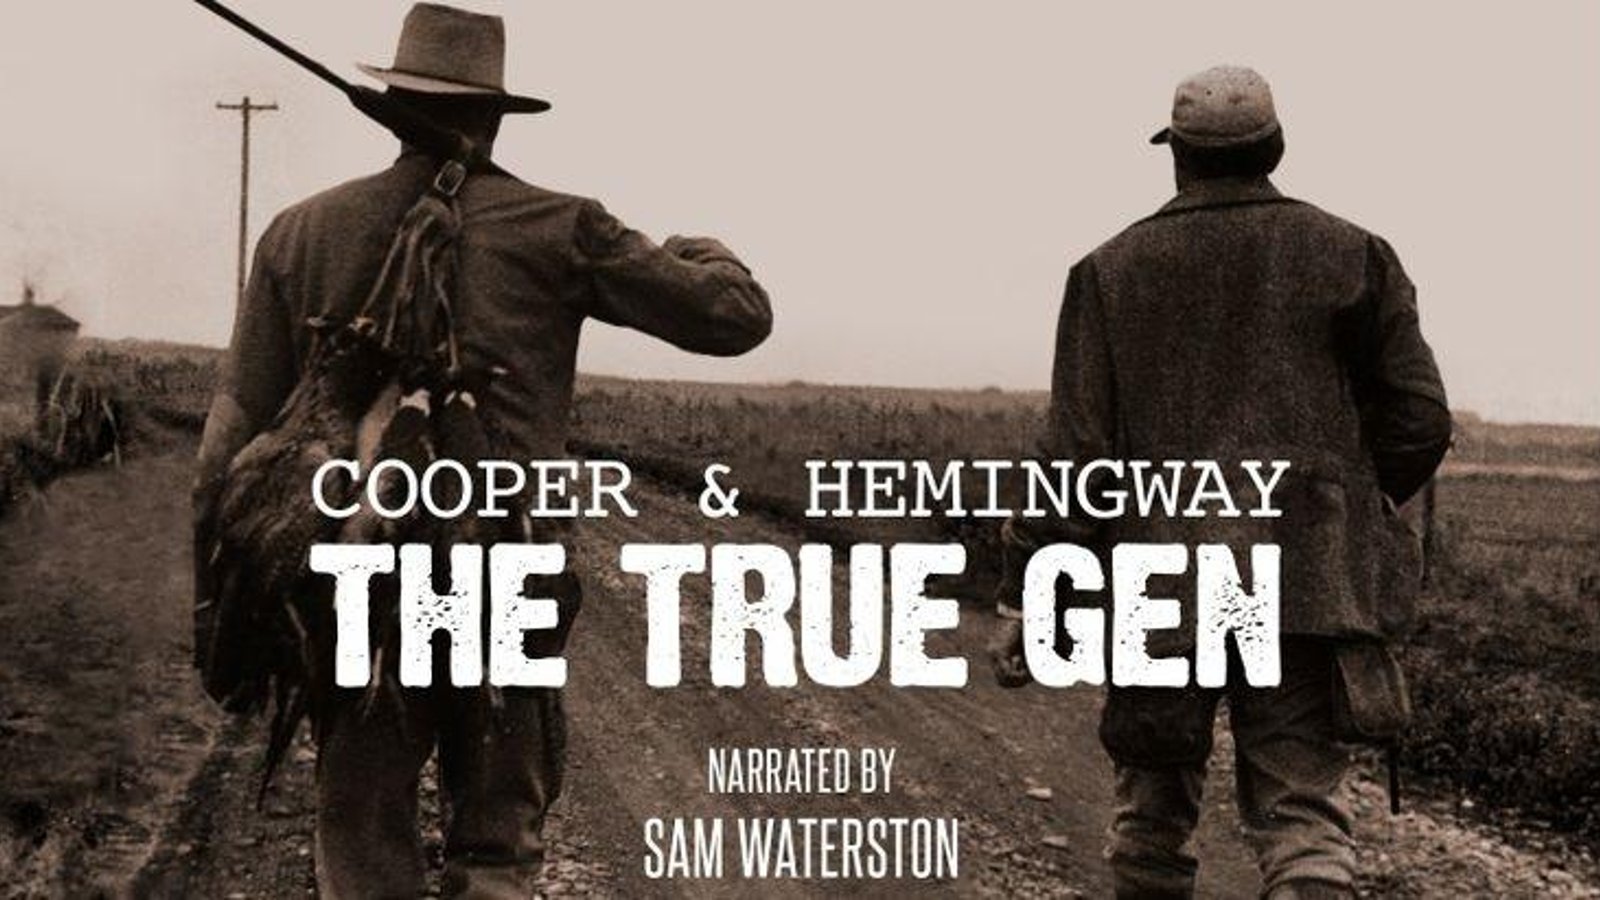 Cooper and Hemingway: The True Gen - The Friendship of a Writer and an Actor